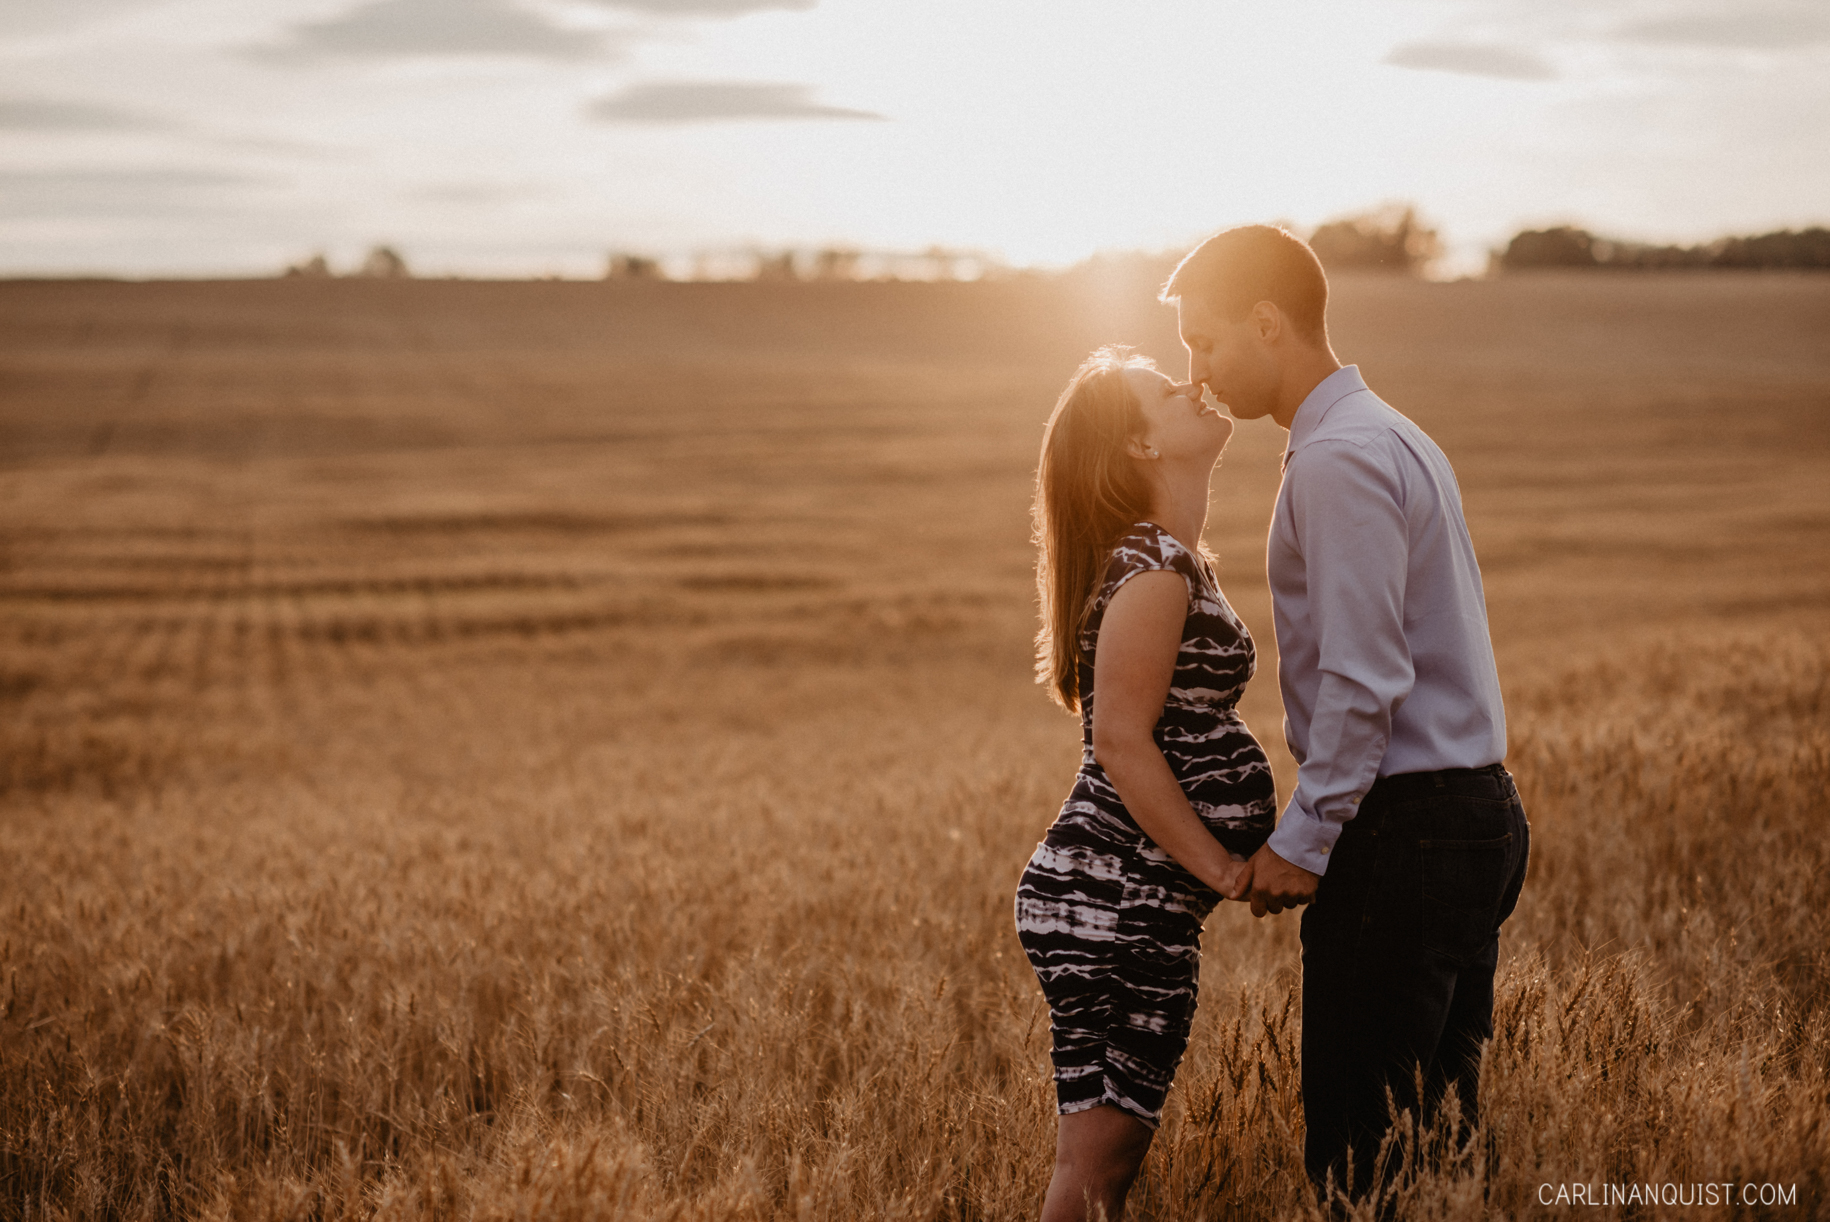 Pregnant Couple Kissing in Sunlight